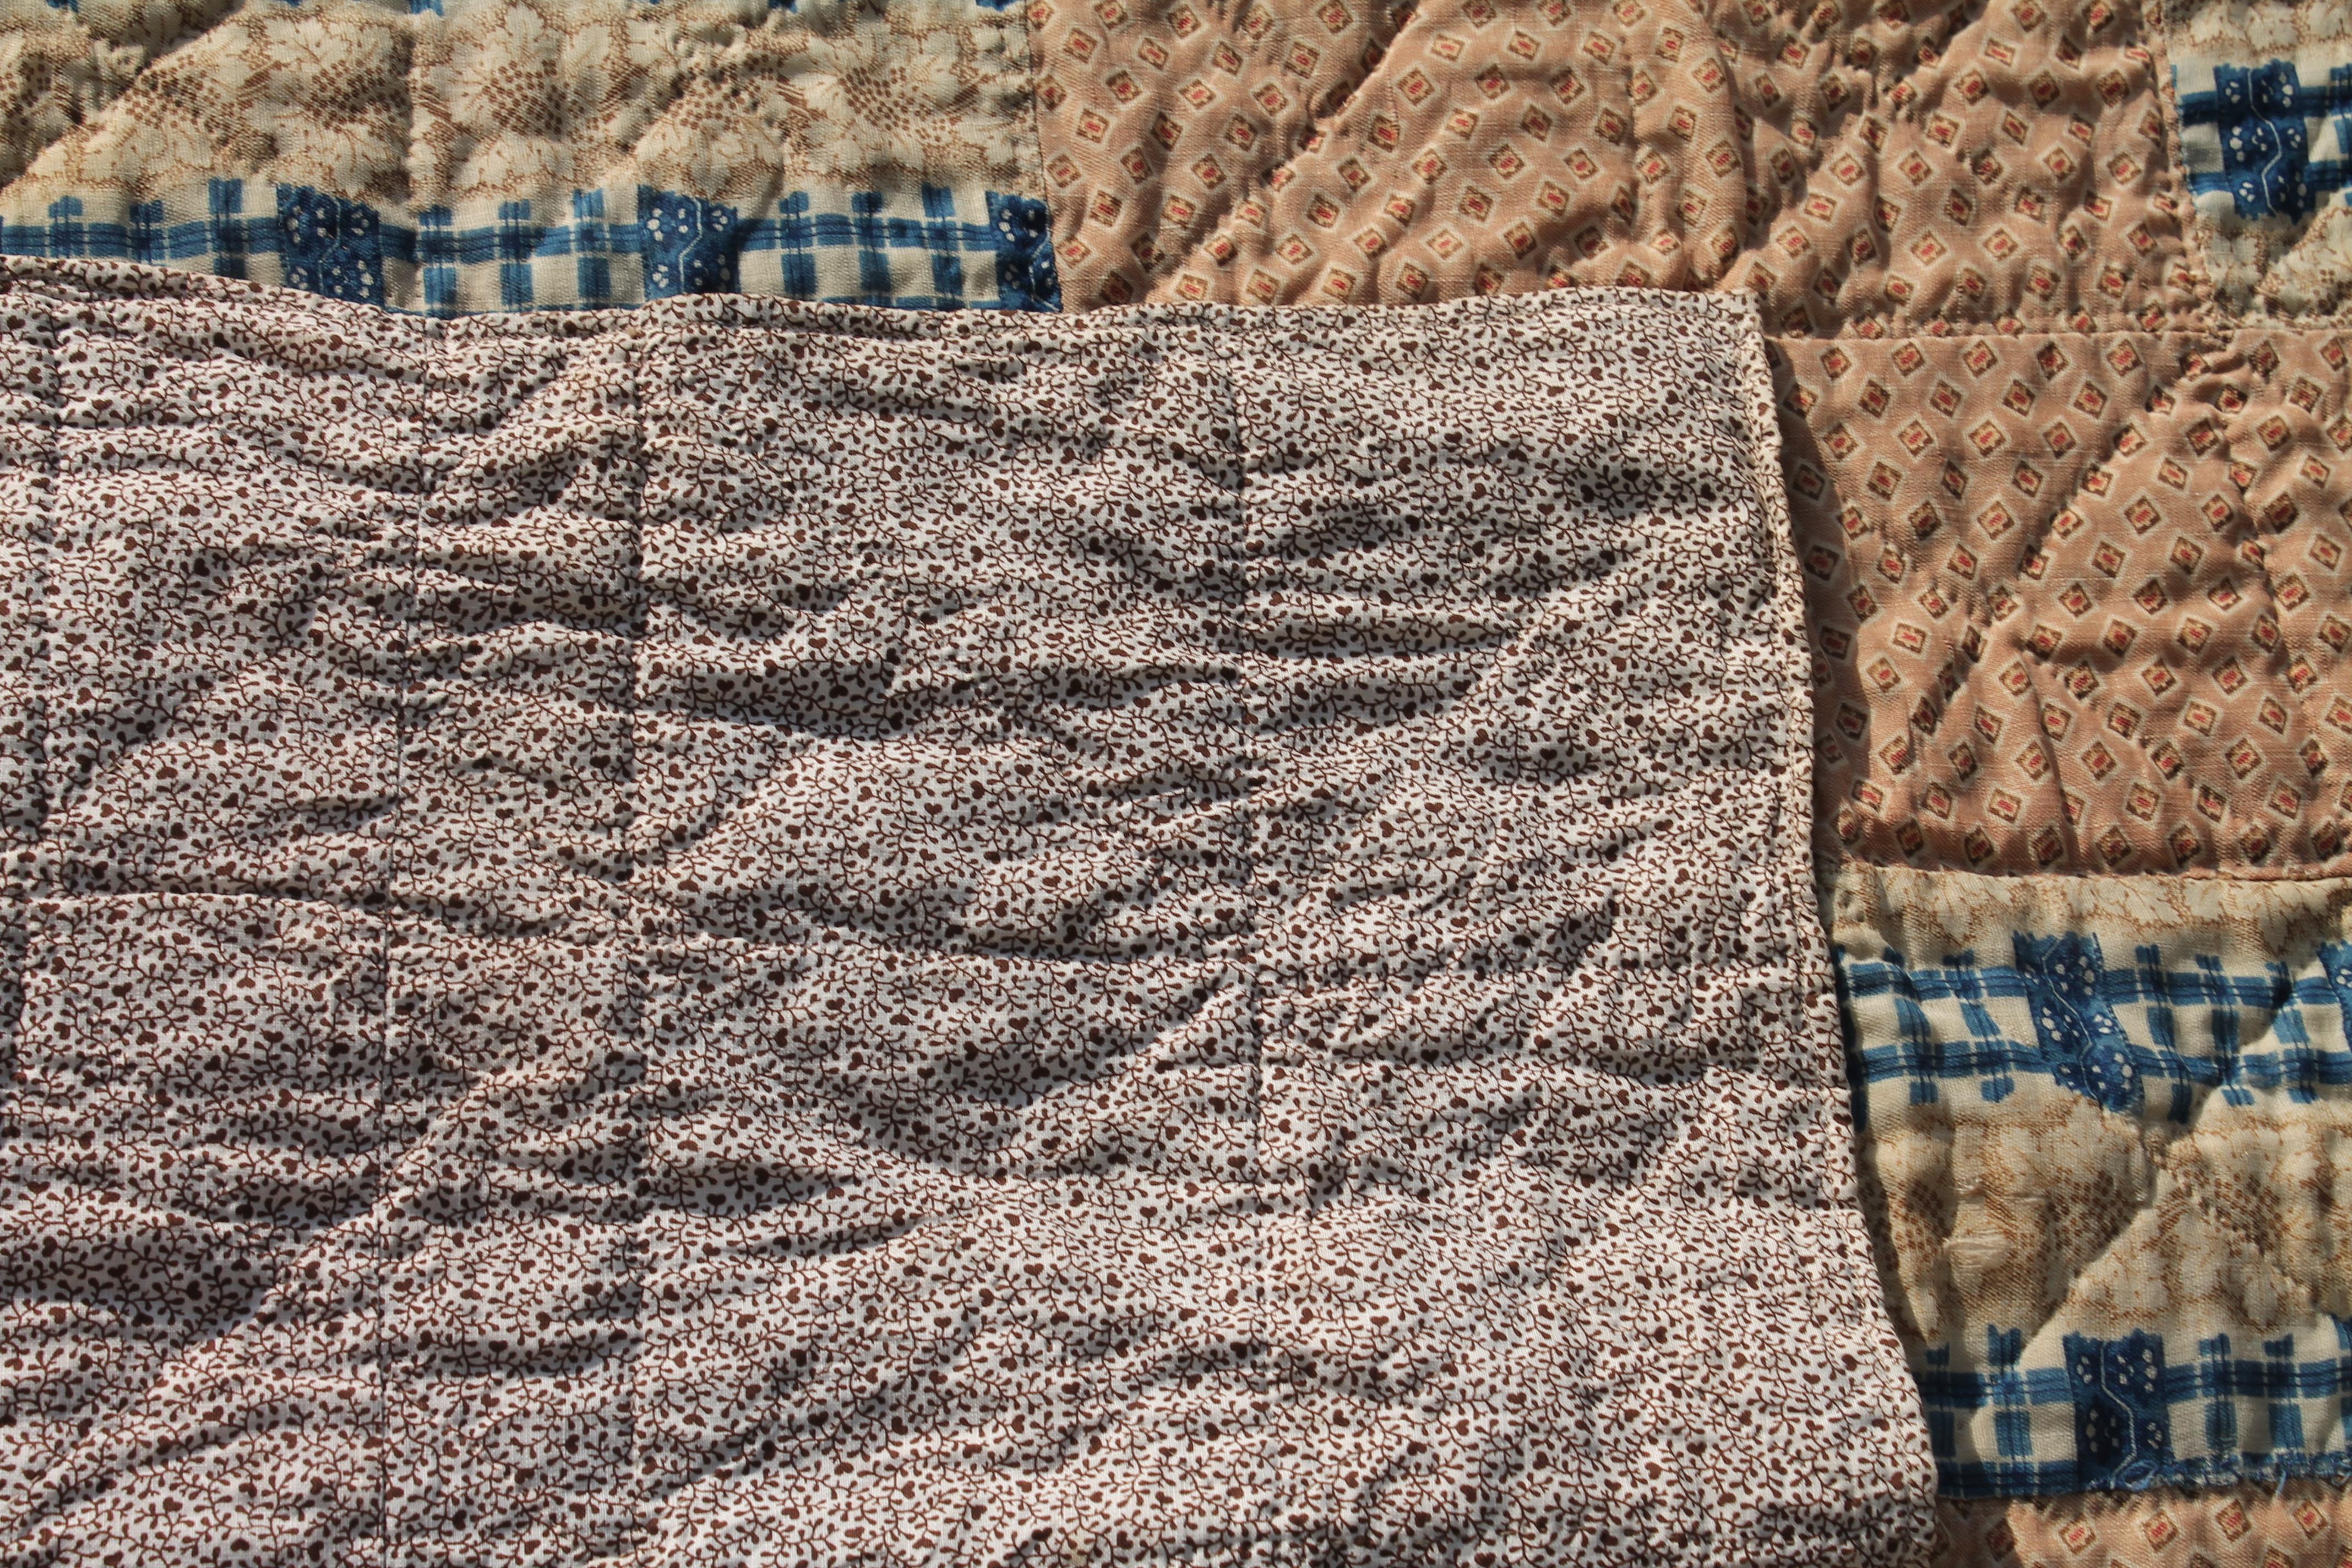 This fine wool and cotton geometric quilt has roller block print fabric. The backing is in a brown calico printed fabric. The condition is very good condition.